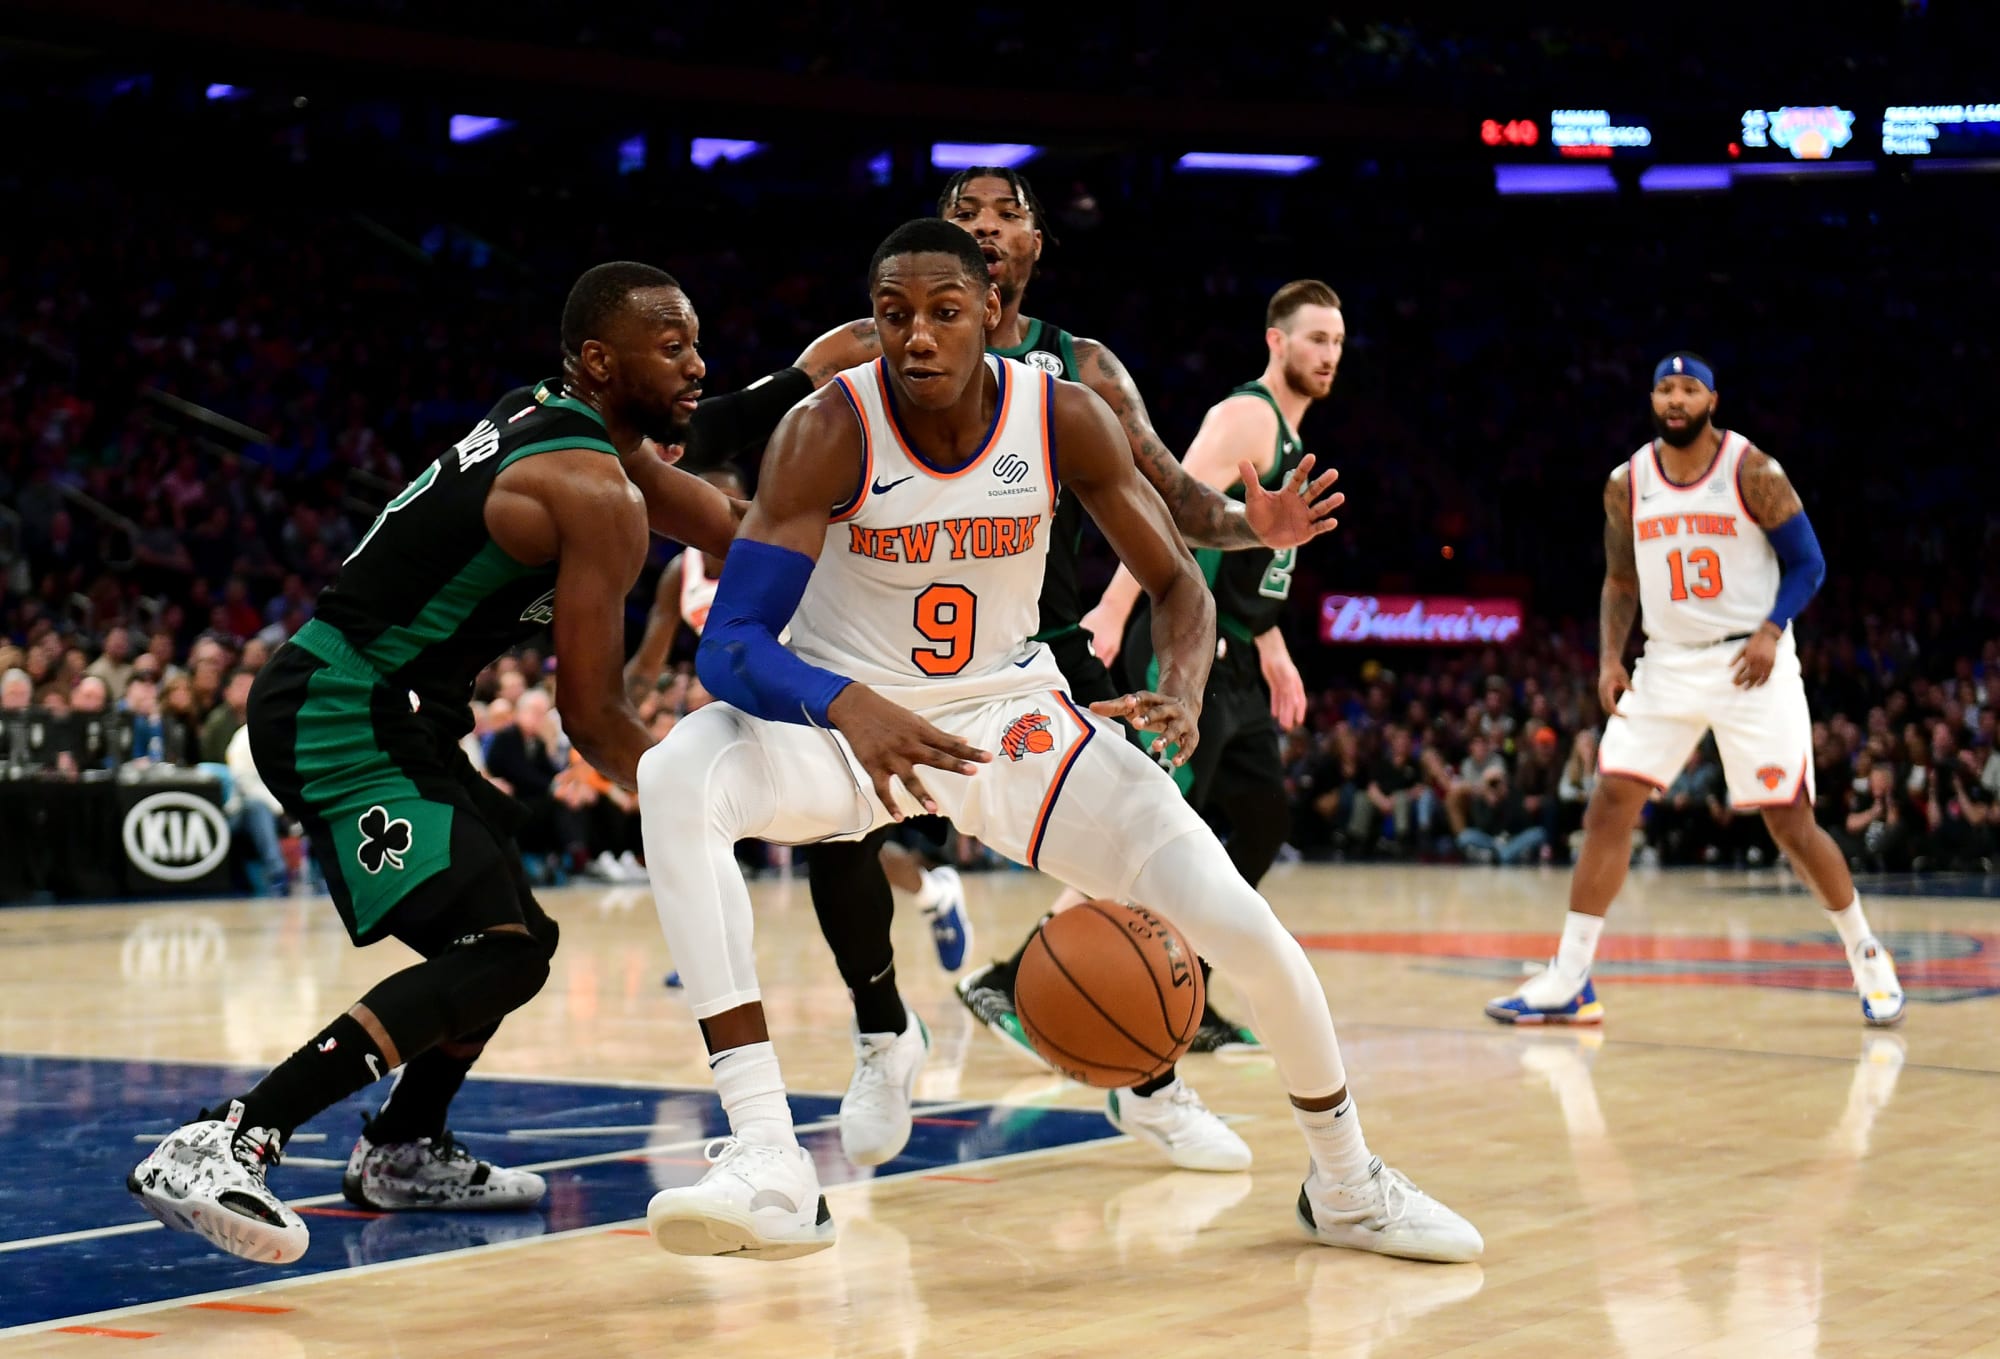 New York Knicks: Is RJ Barrett the future star they've been looking for?